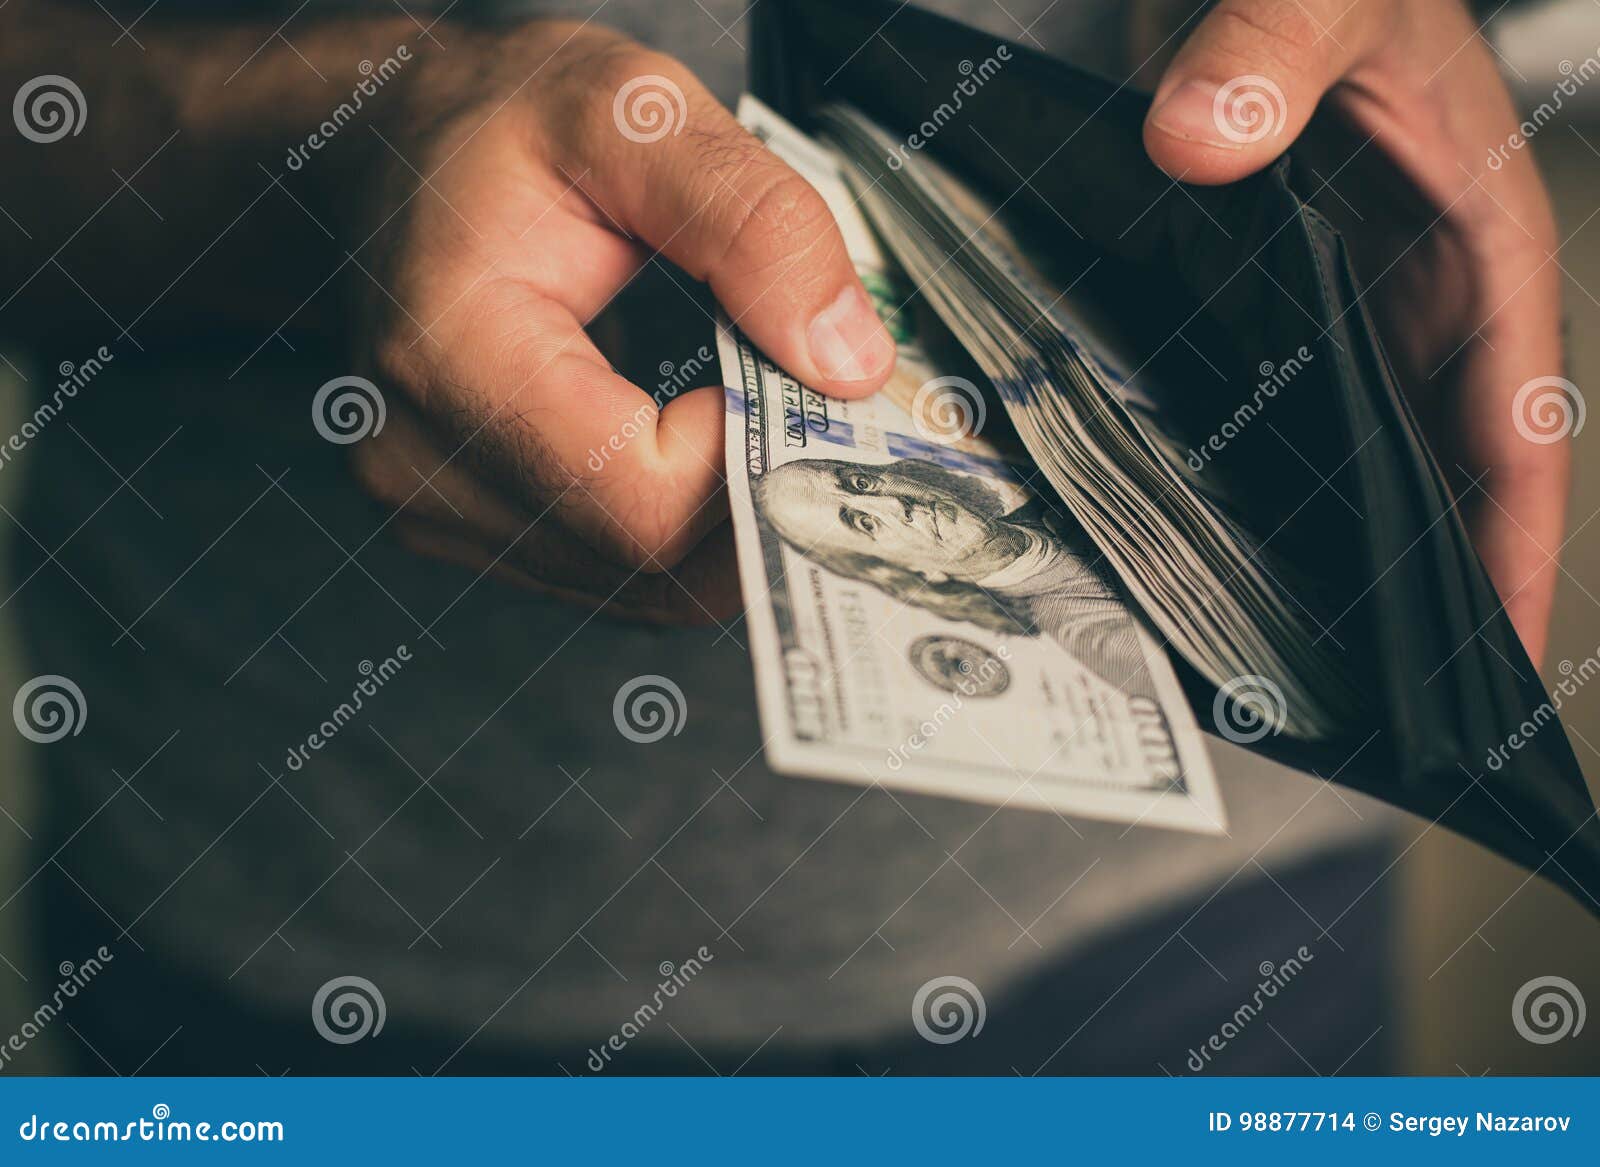 man looks in the wallet. cash. wealthy man counting his money. close up.